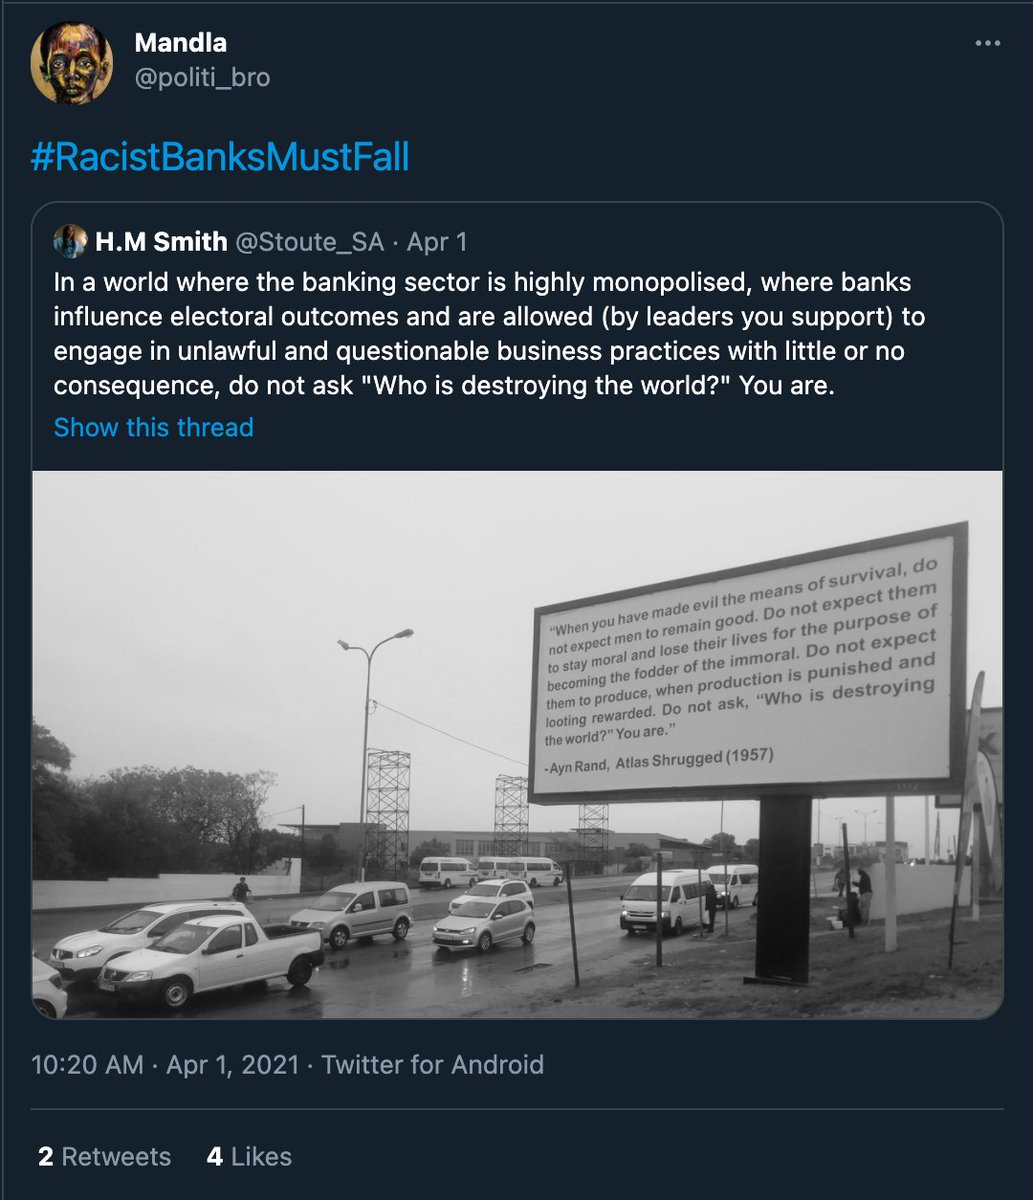 I doubt it's even this one by an RET promo acount that quotes someone else's tweet which includes (and I'm not making this up), a picture of a billboard displaying an Ayn Rand quote. RET accounts don't manage irony very well.